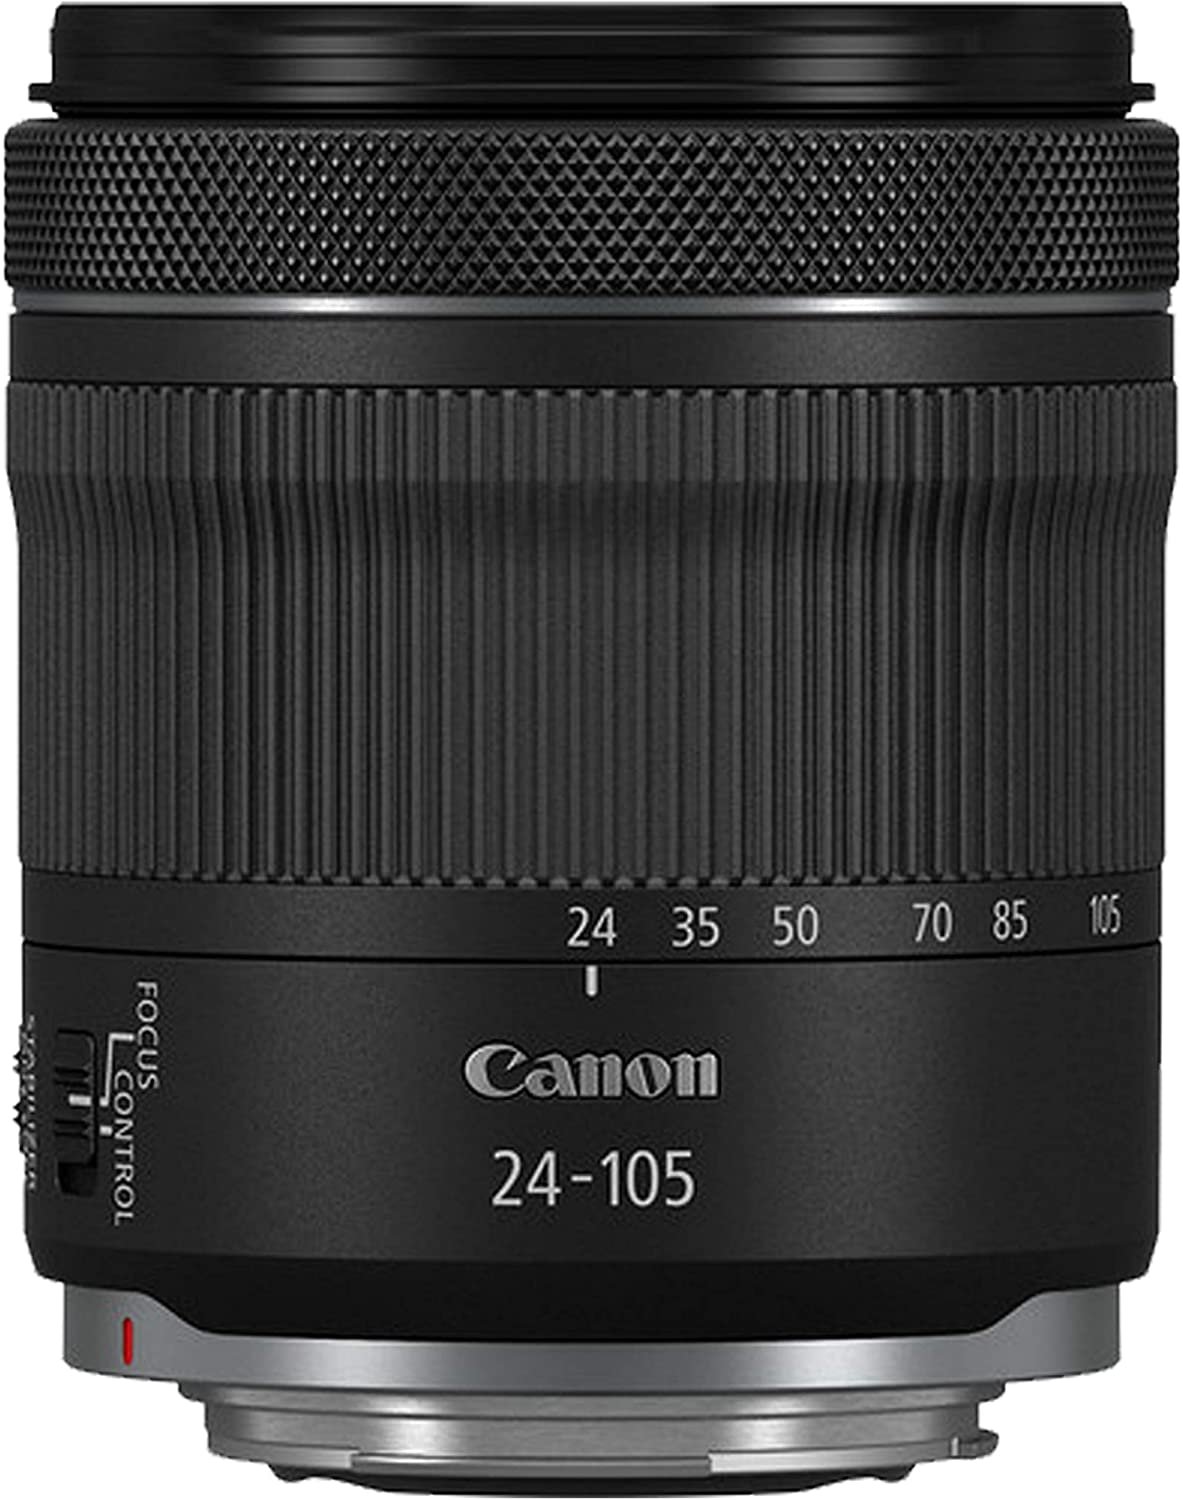 Canon EOS R6 Mirrorless Digital Camera with 24-105mm f/4-7.1 Lens Bundle + 128GB Memory + Case + Filters + Tripod 24pc Bundle - image 3 of 8